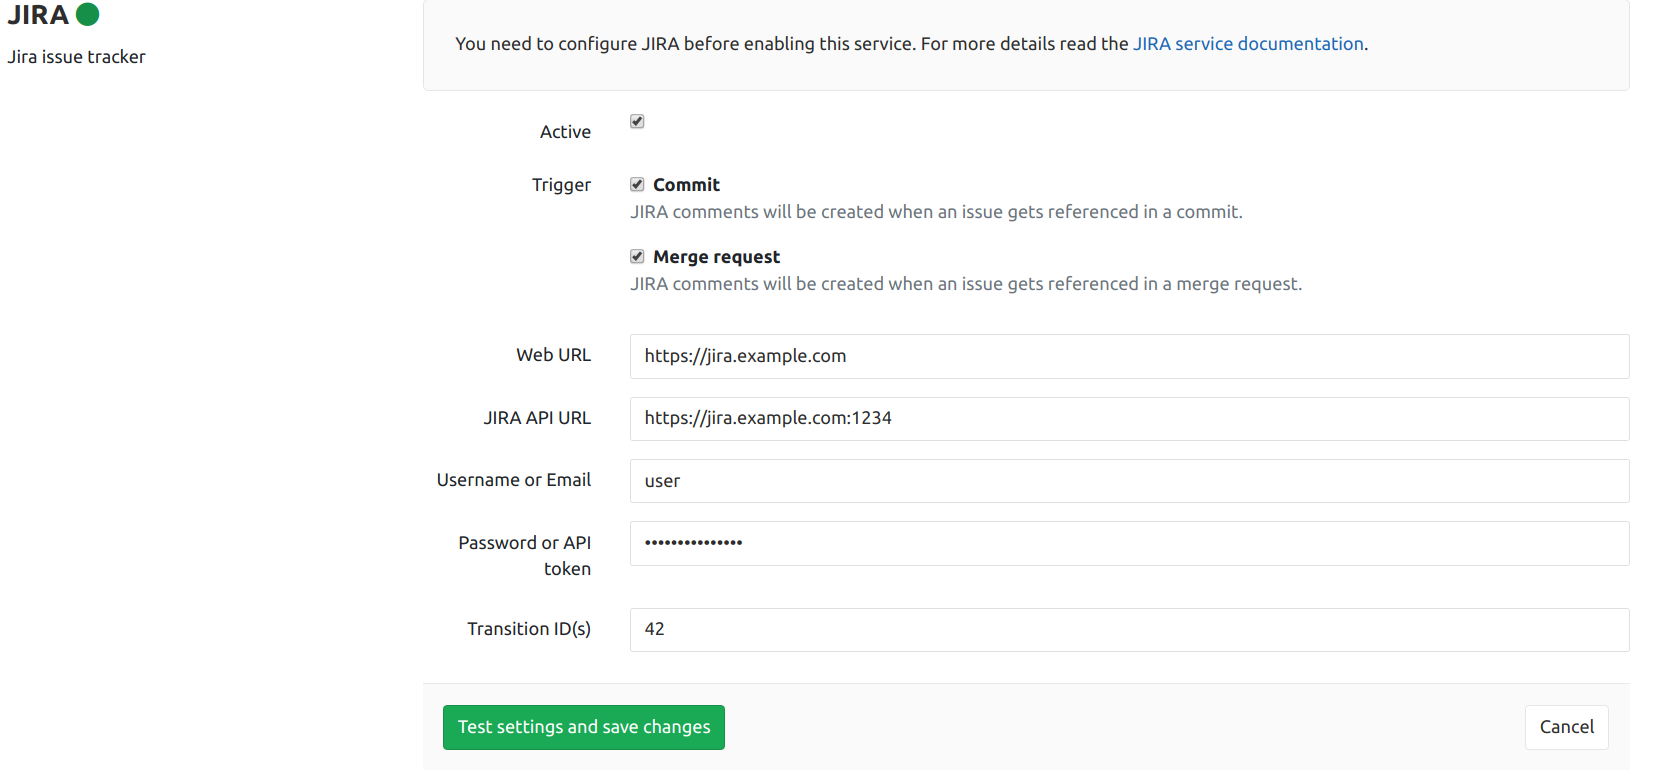 doc/user/project/integrations/img/jira_service_page.png